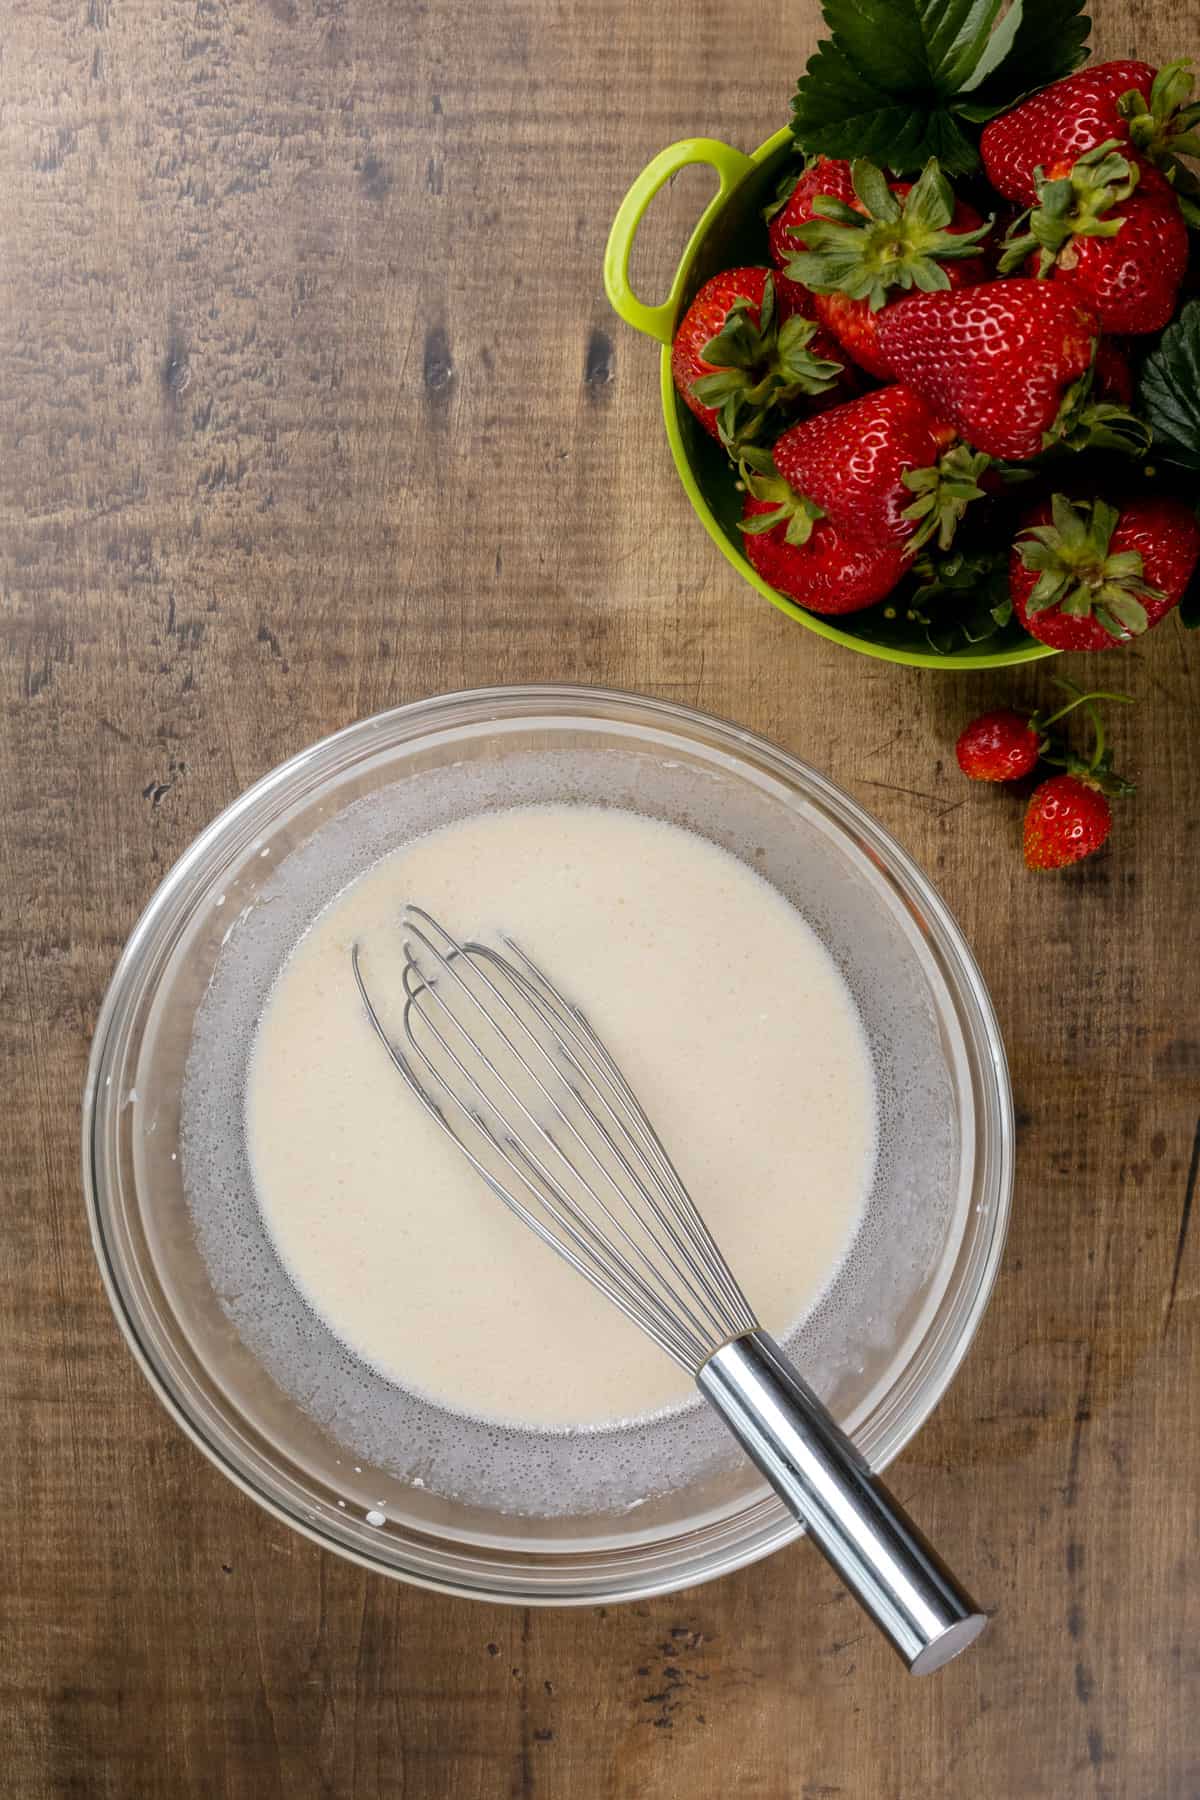 A glass bowl is filled with the wet ingredients for the shortcakes. A bowl of fresh strawberries are next to the bowl.